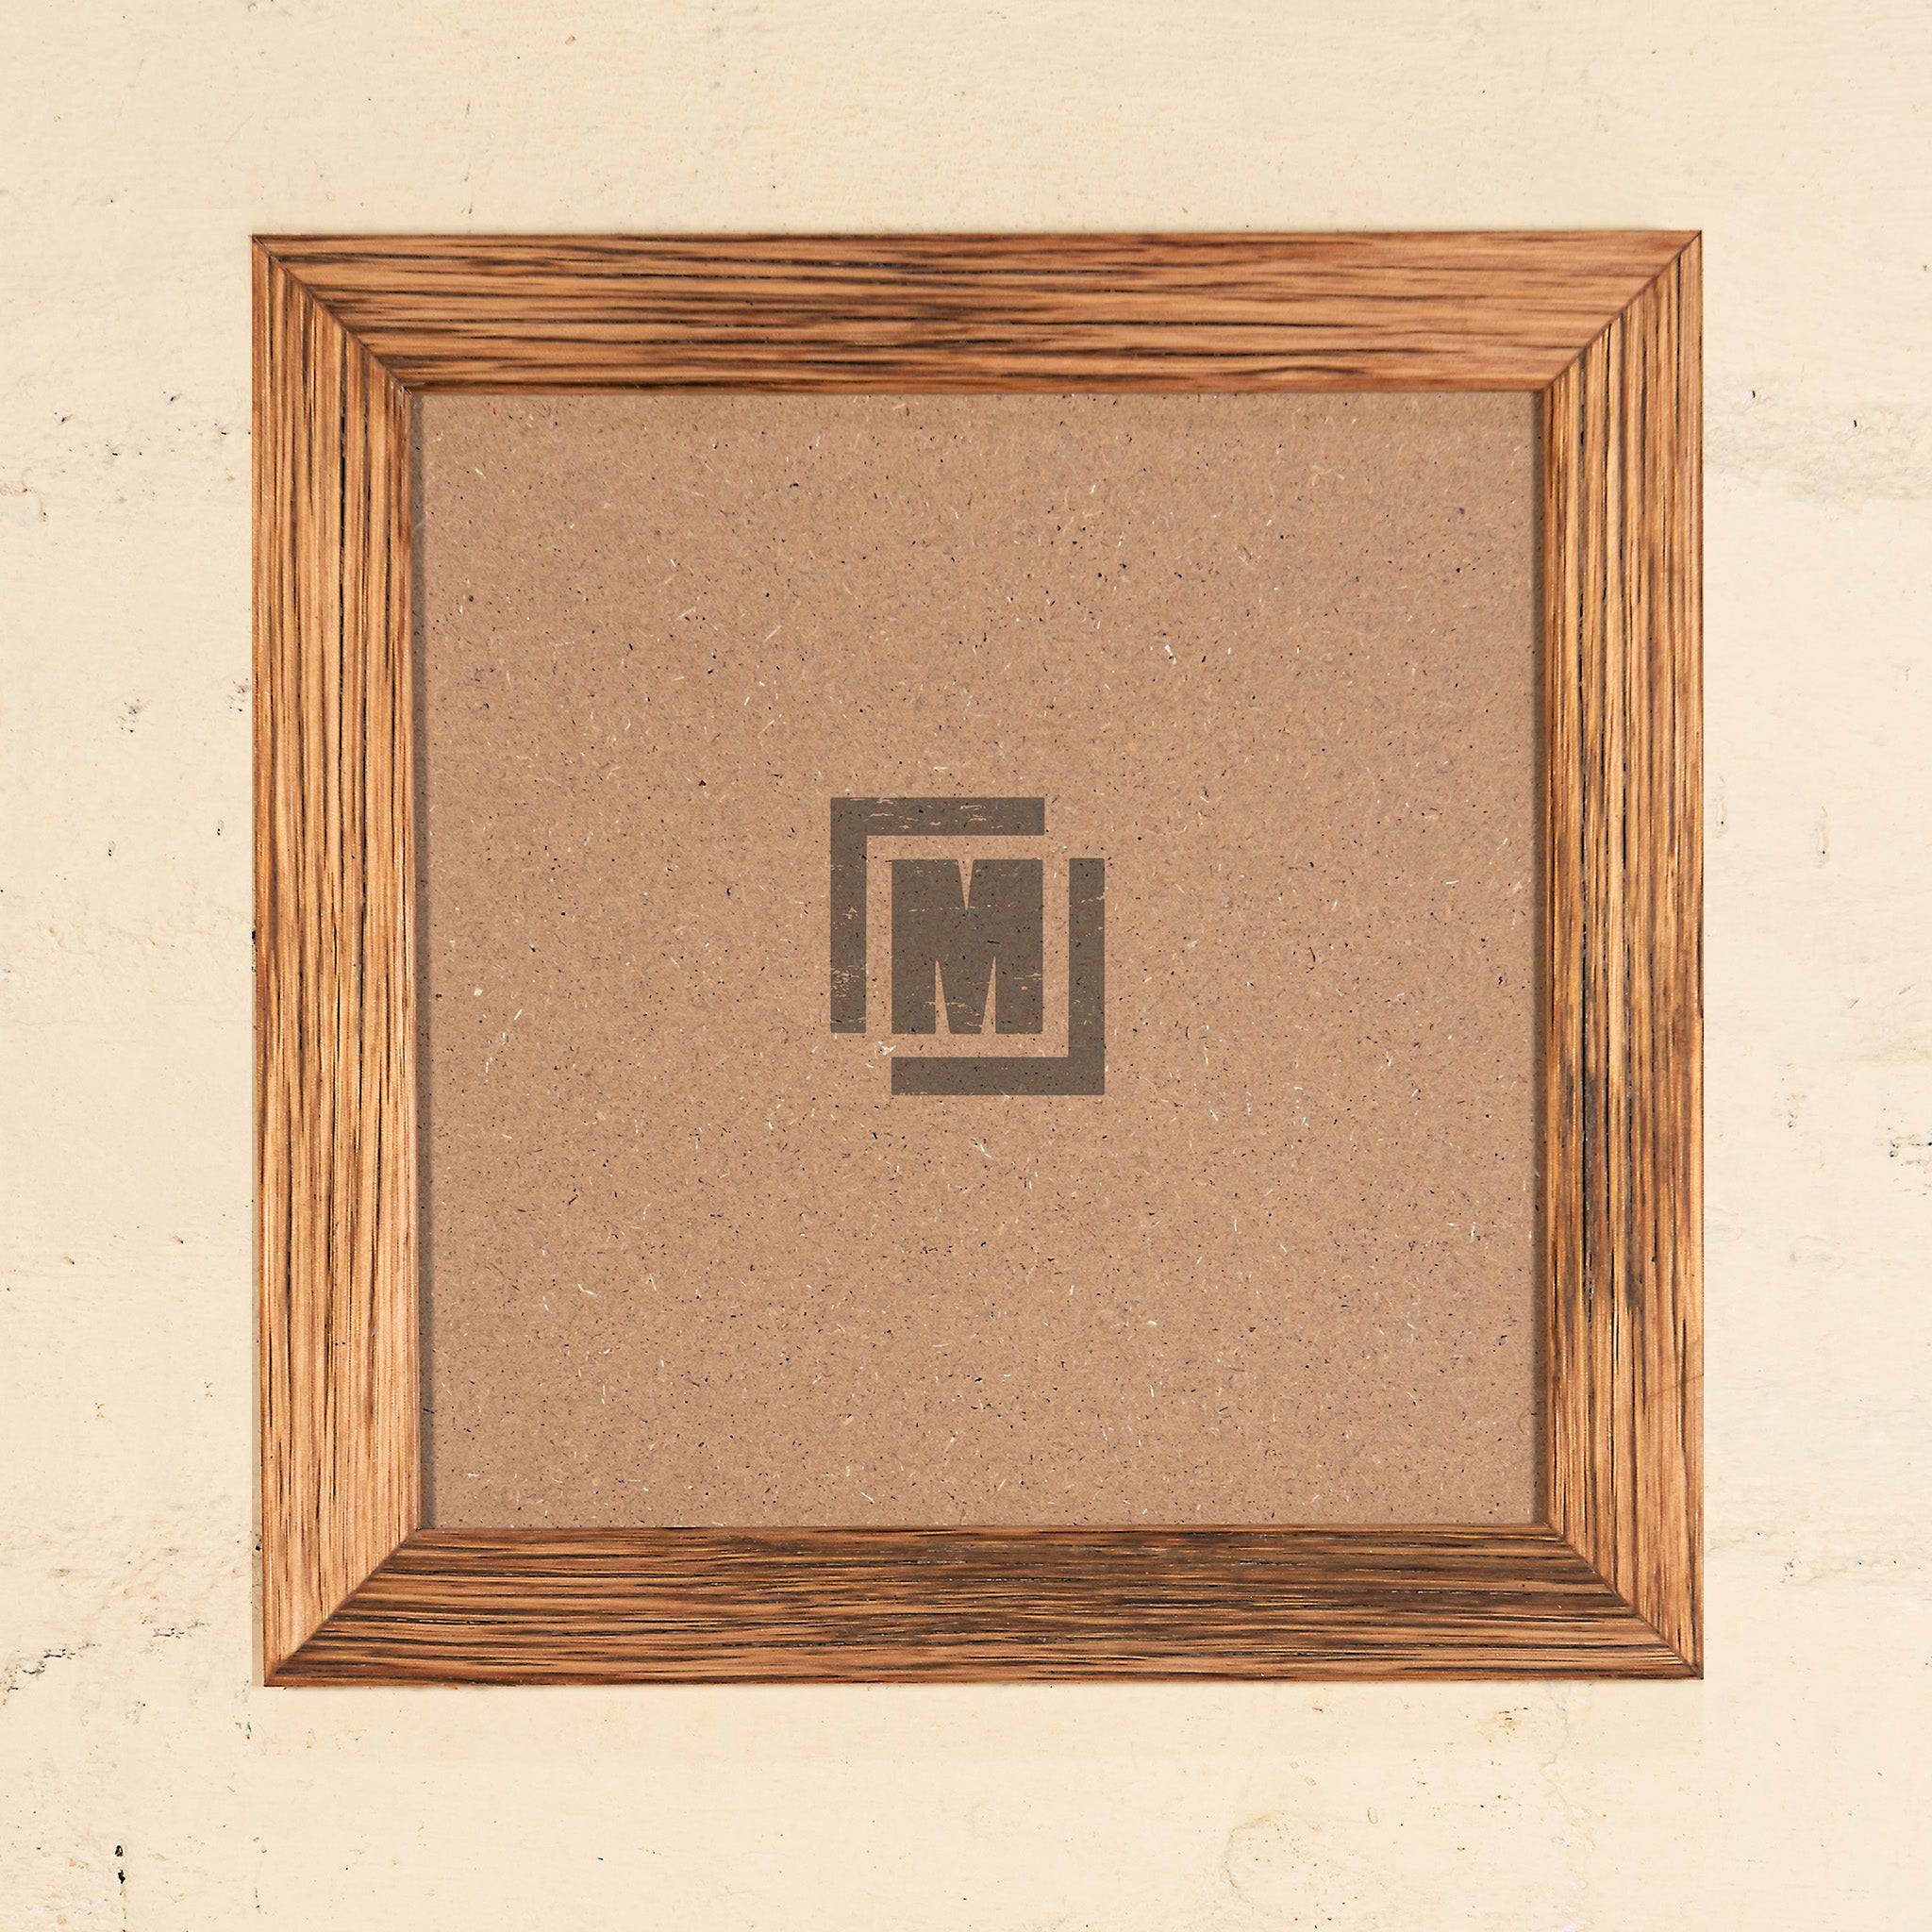 Square 8 x 8 wooden picture frame, made from upcycled hardwood. Honey brown and dark brown colour tones. 